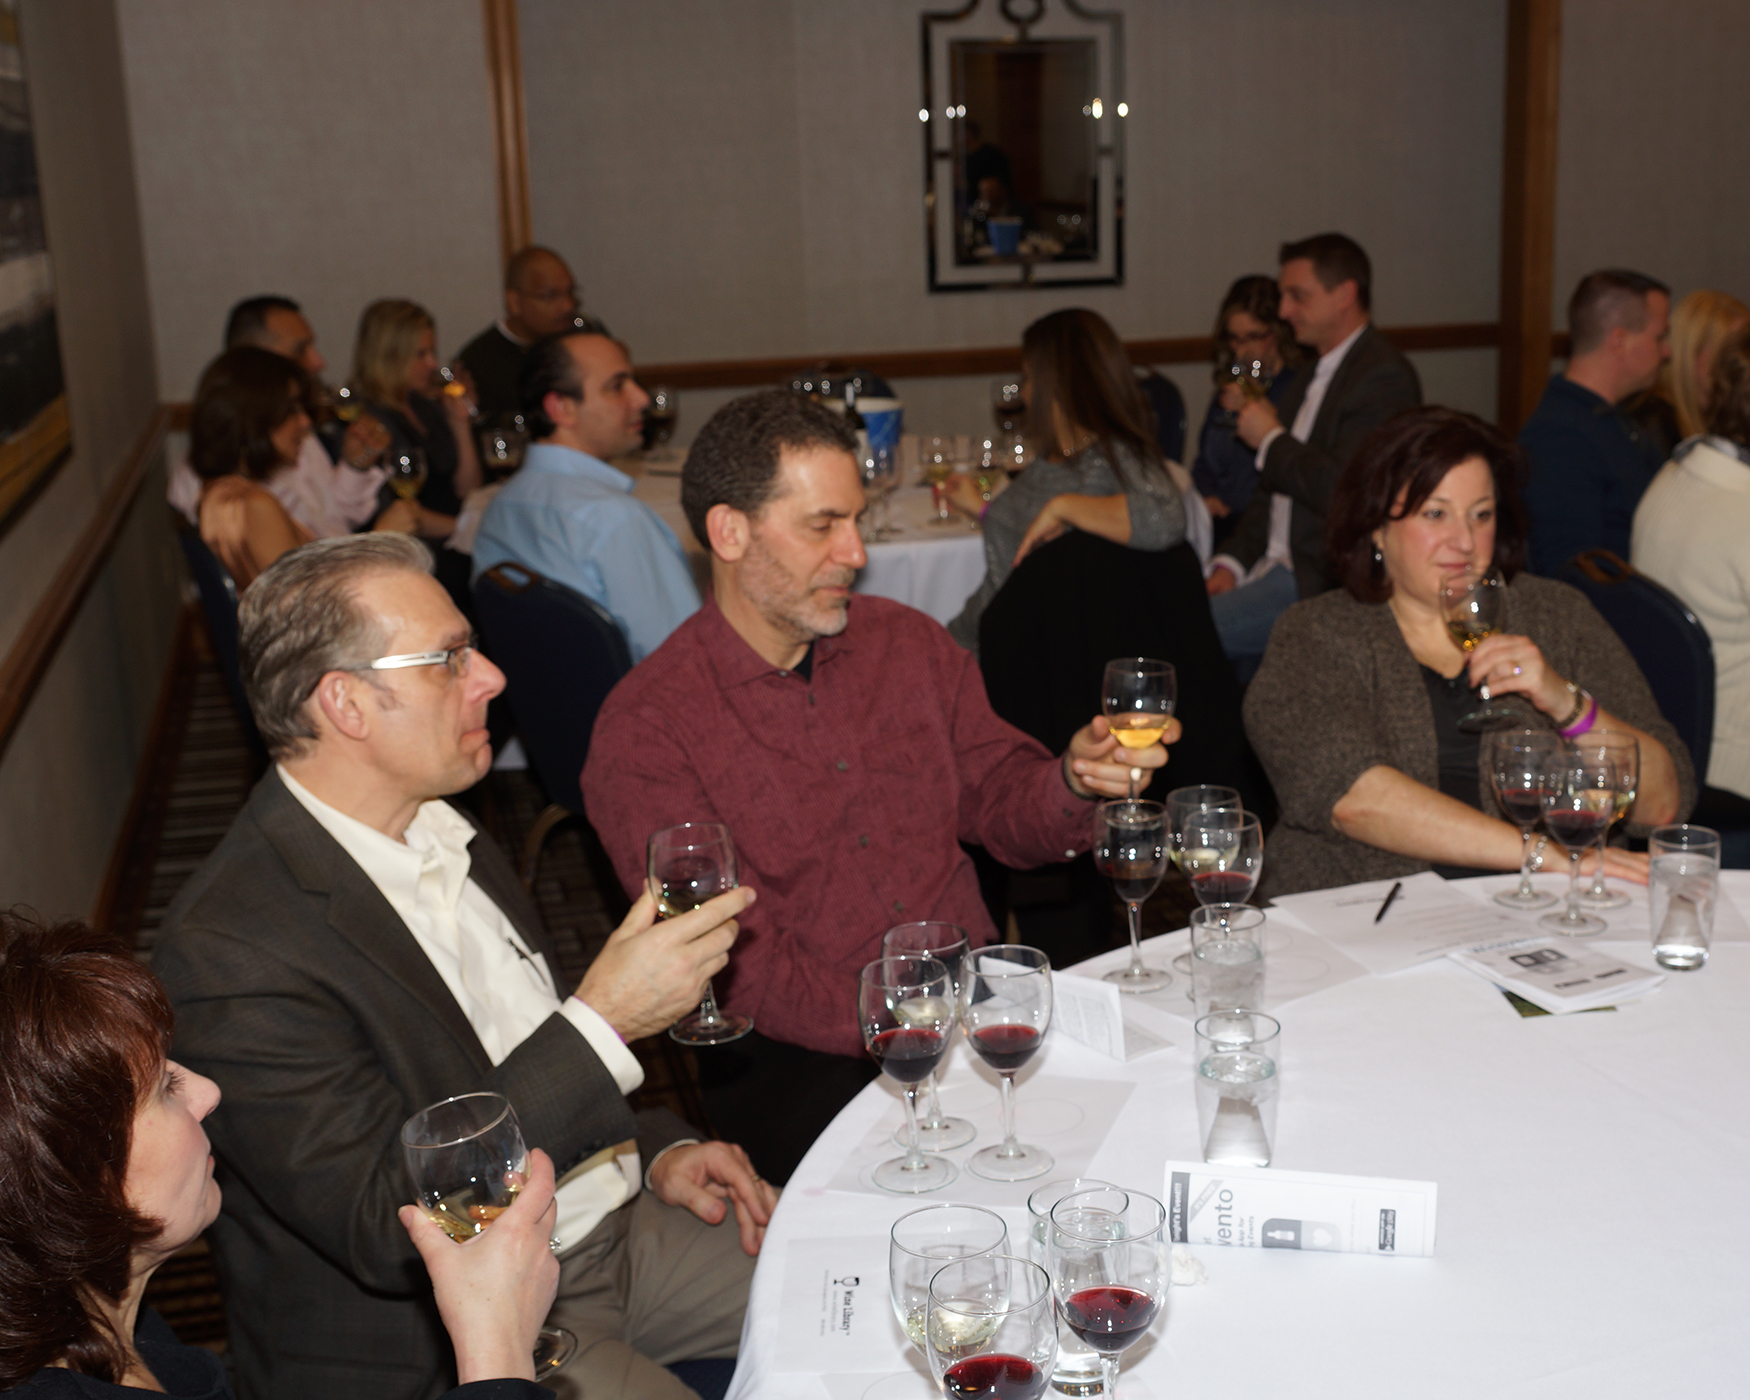 For a nominal fee, the NJ Spring Wine Festival offers an optional wine class with a wine expert during the event.